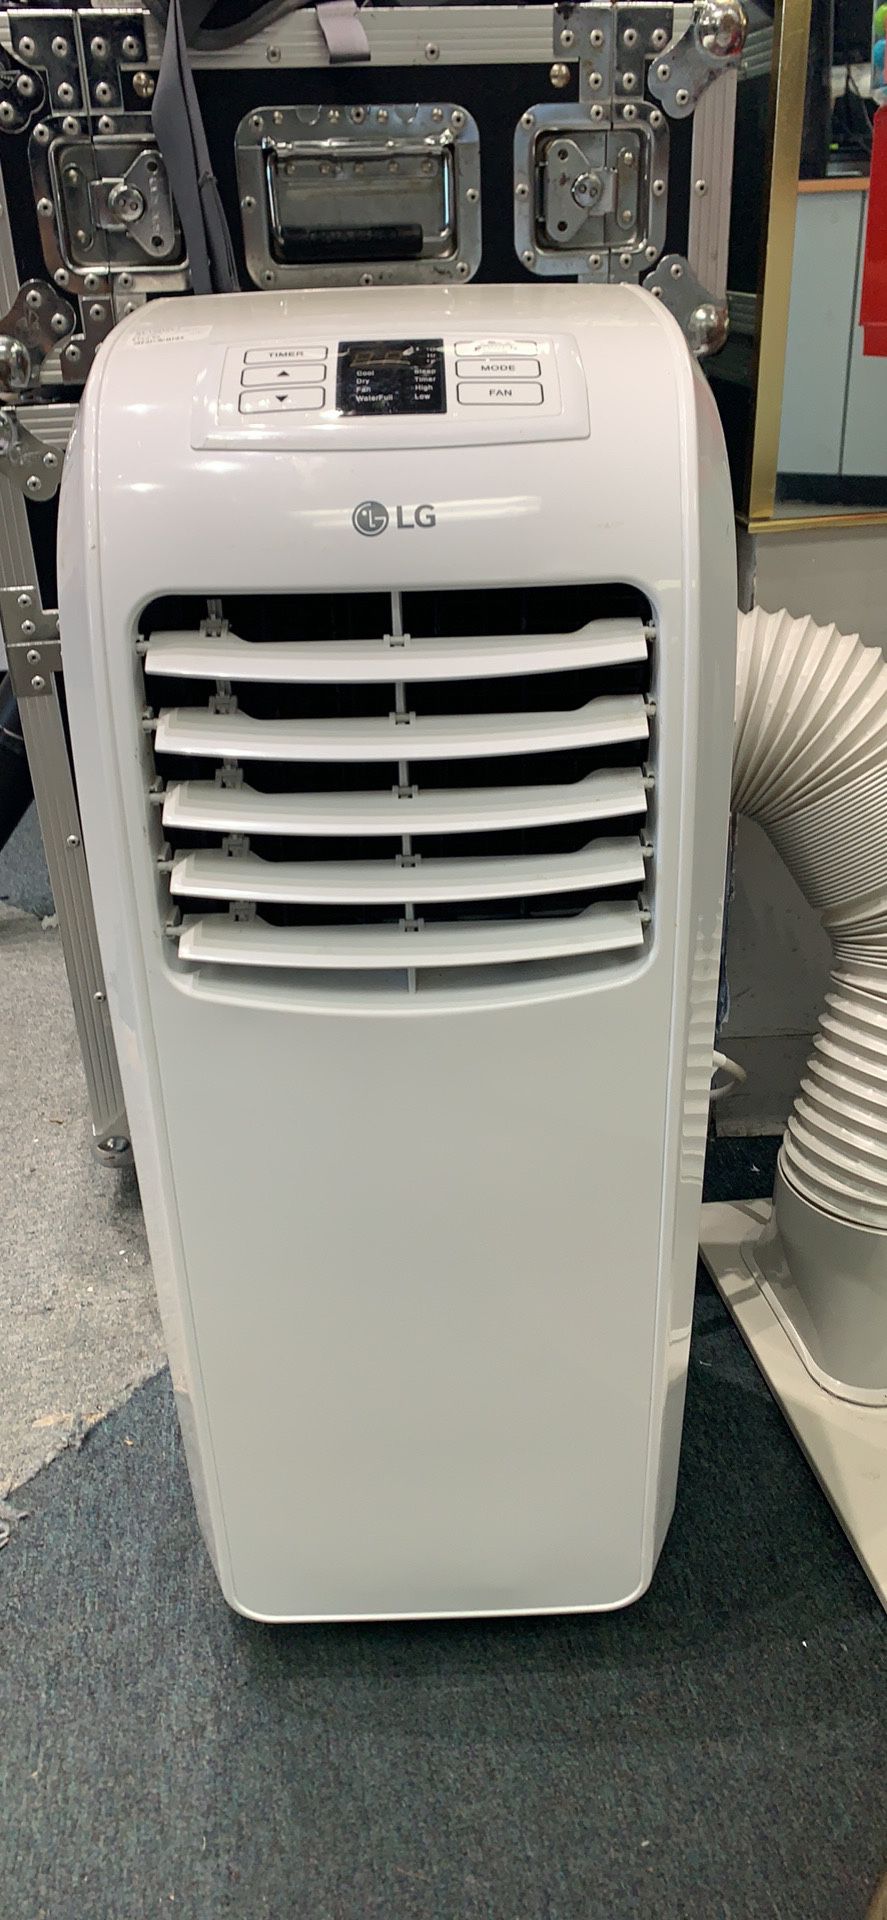 LG portable air conditioner and dehumidifier